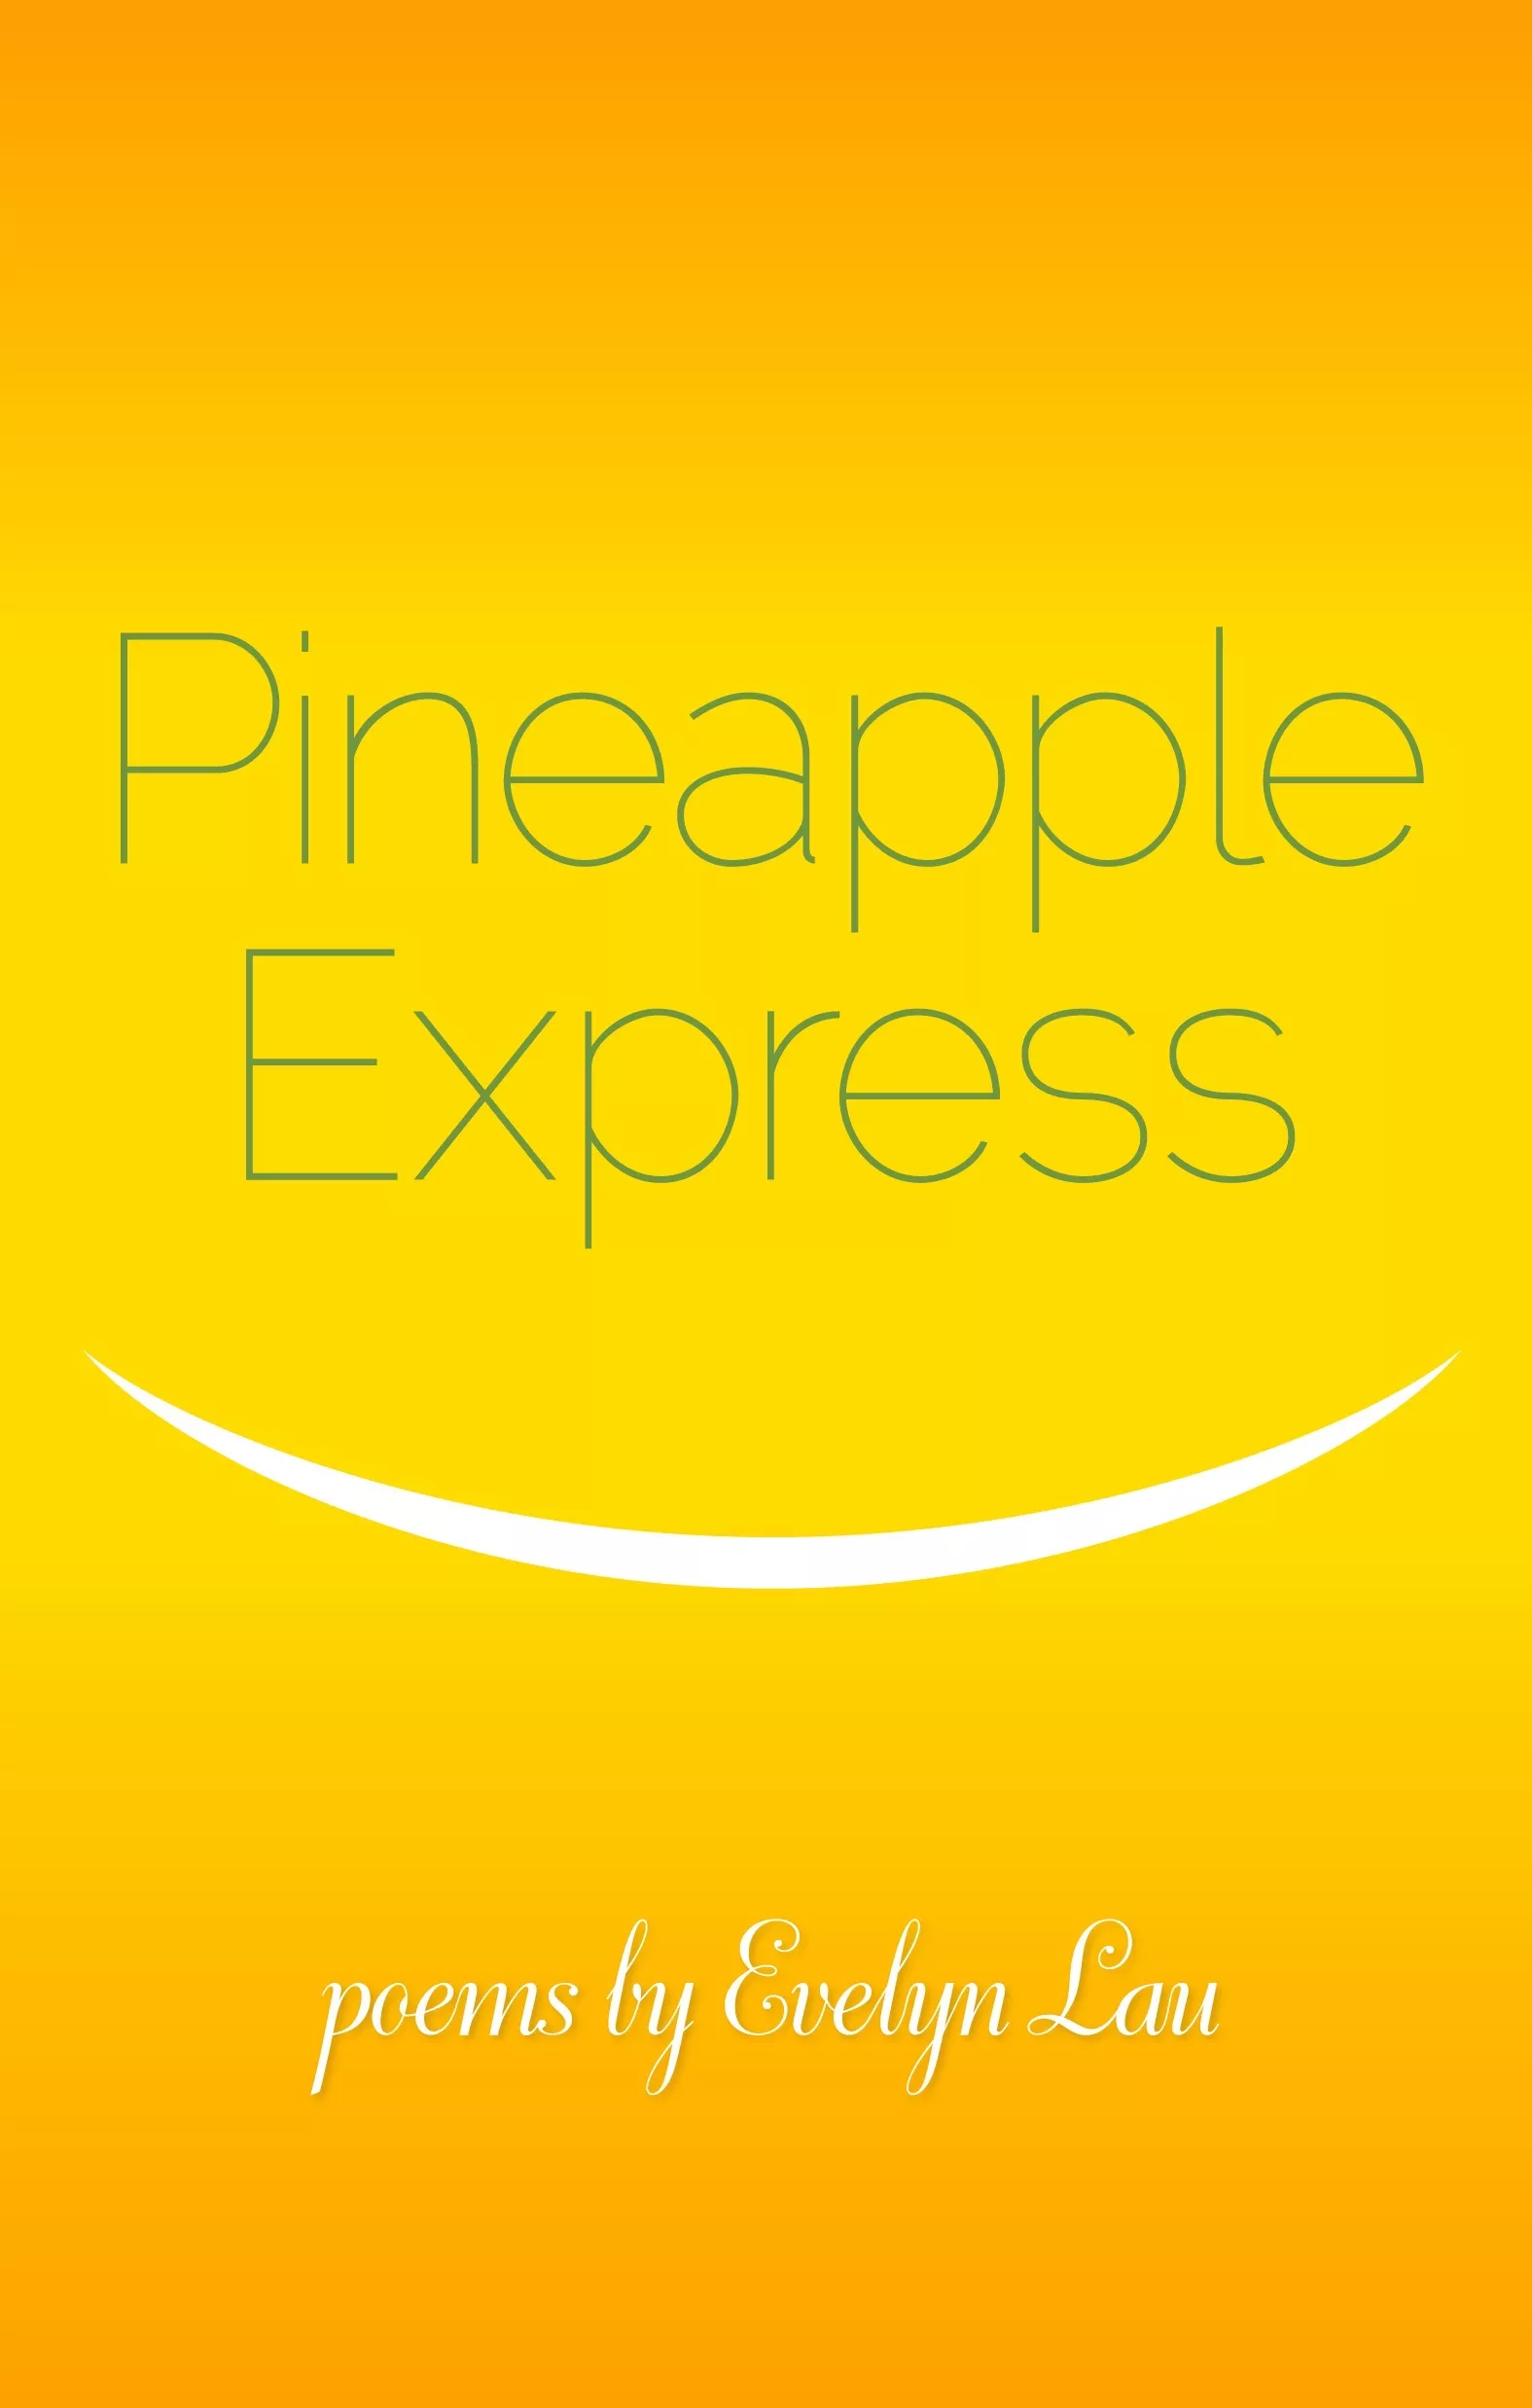 Pineapple express book cover